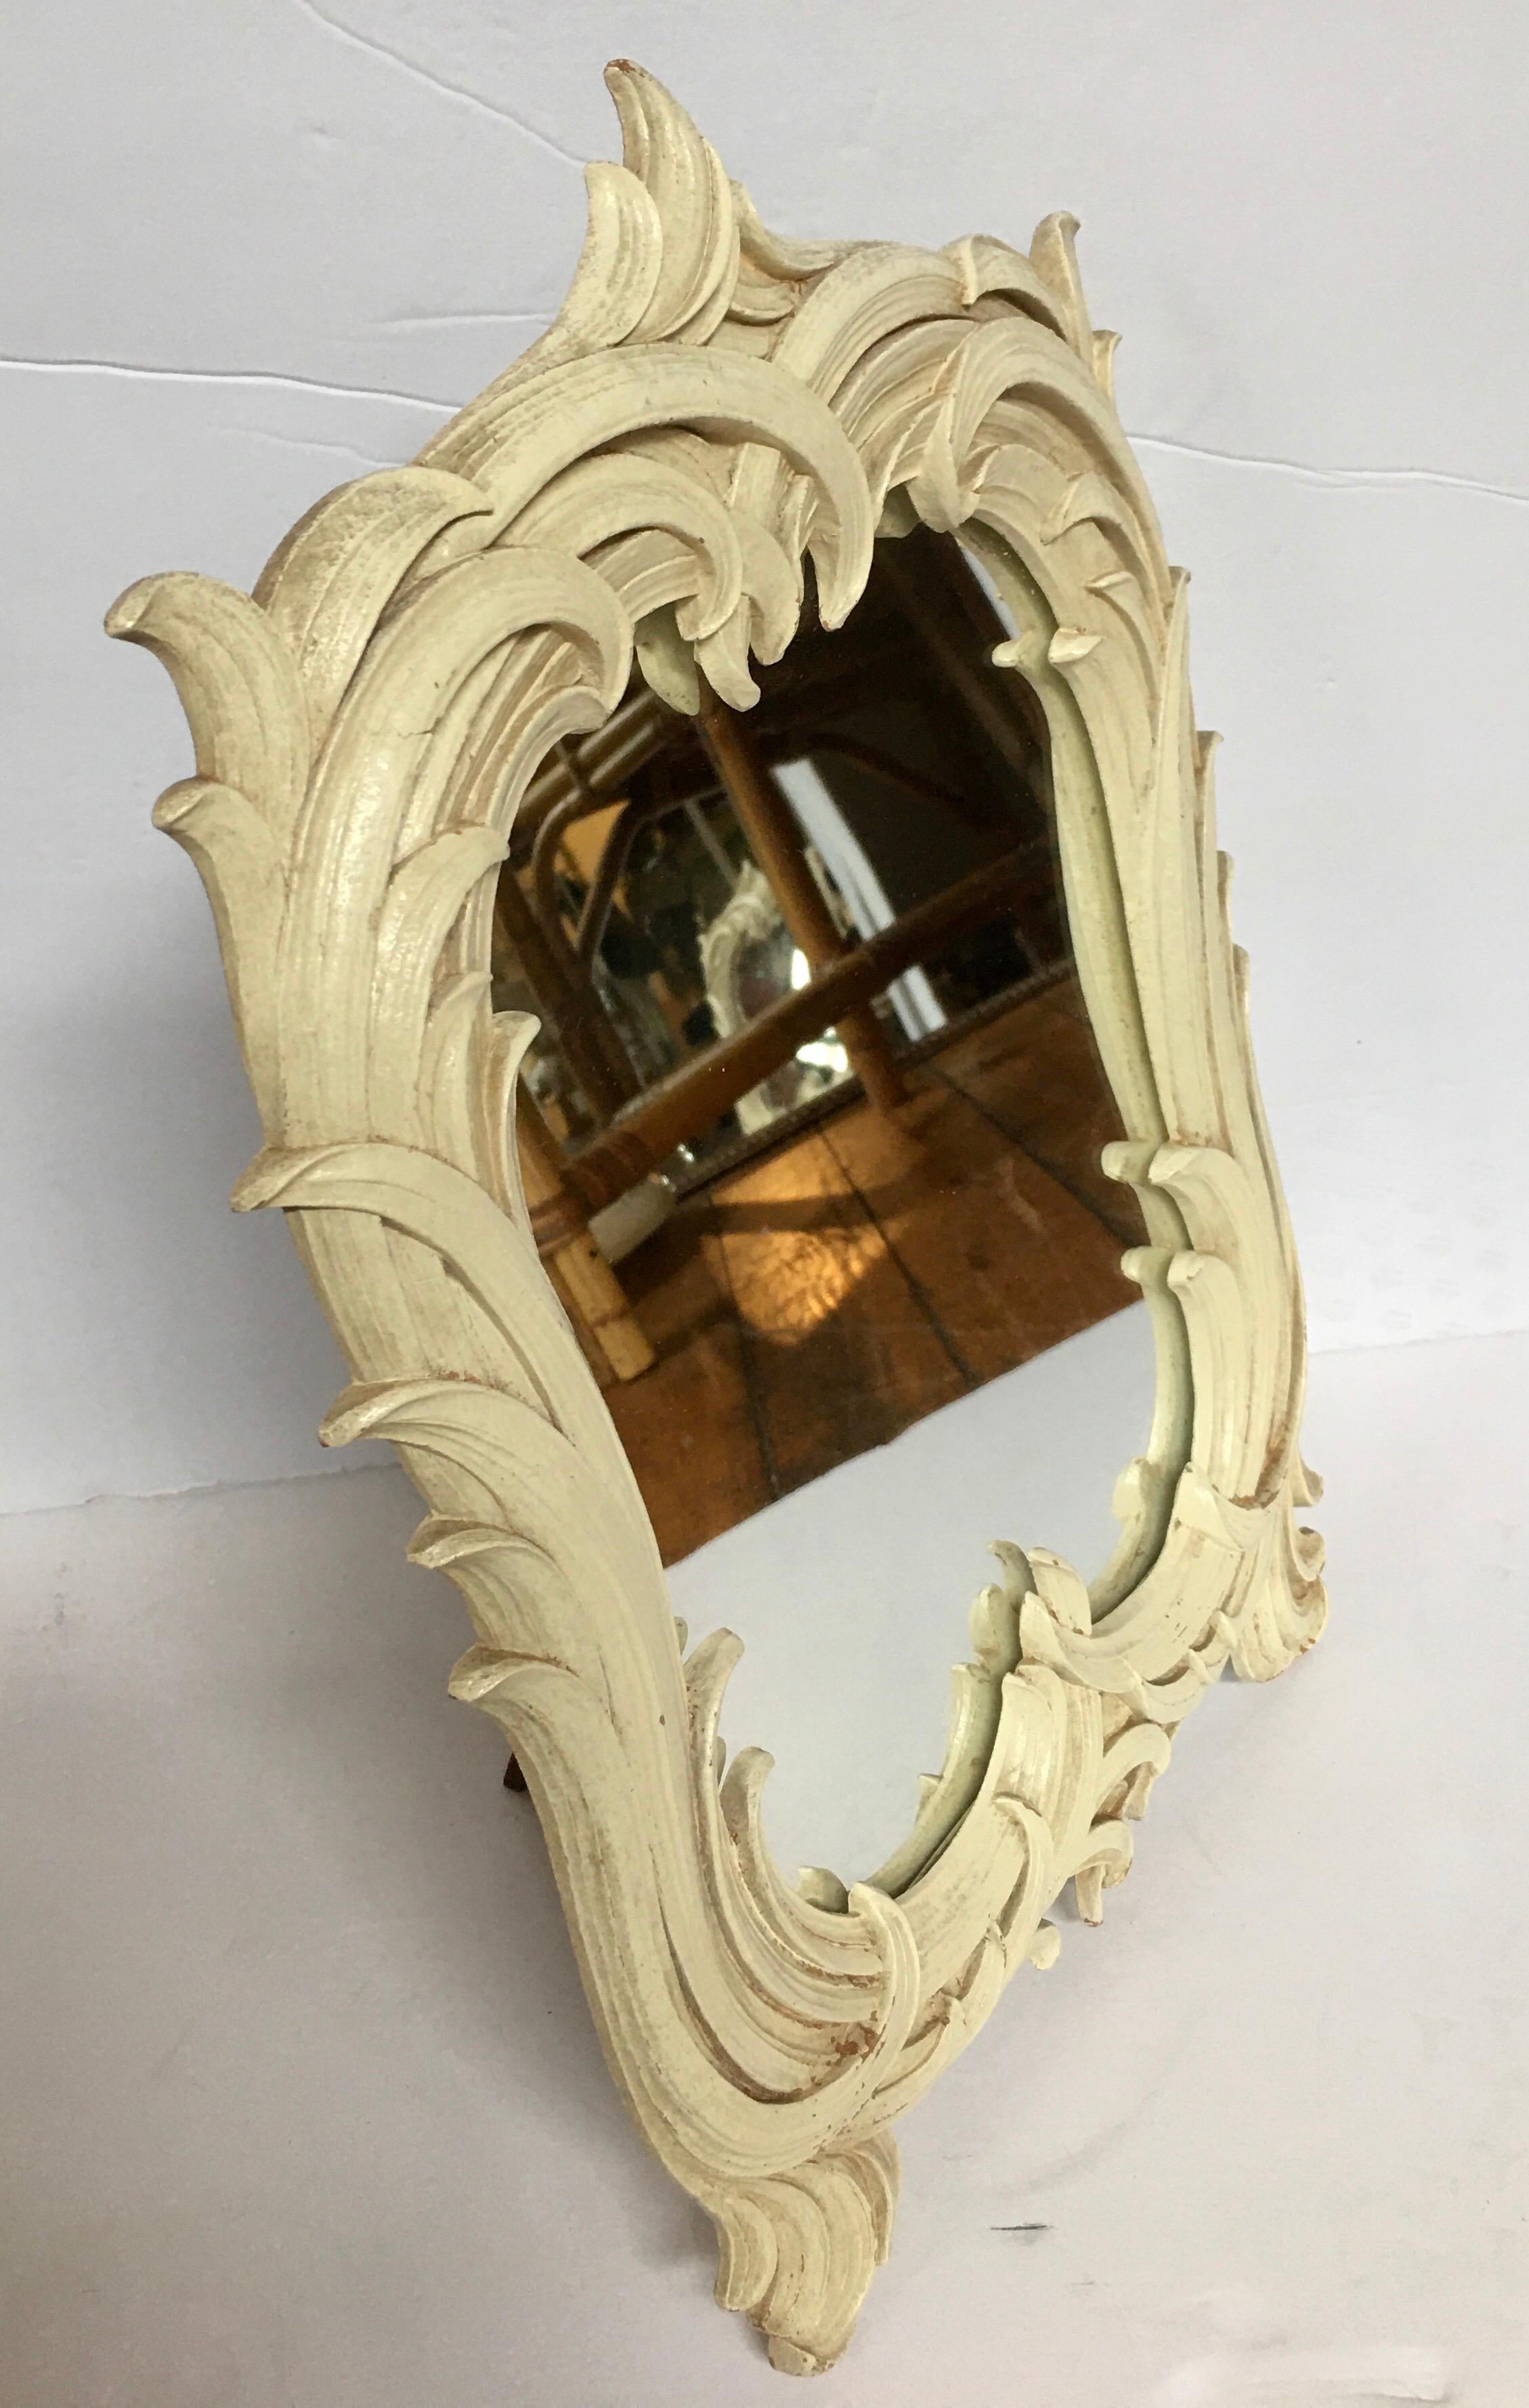 Hollywood Regency Serge Roche style palm leaf mirror featuring a plaster-like matte cream finish. This sculptural palm frond form mirror can be displayed on a tabletop or hung on the wall with the addition of a wire.